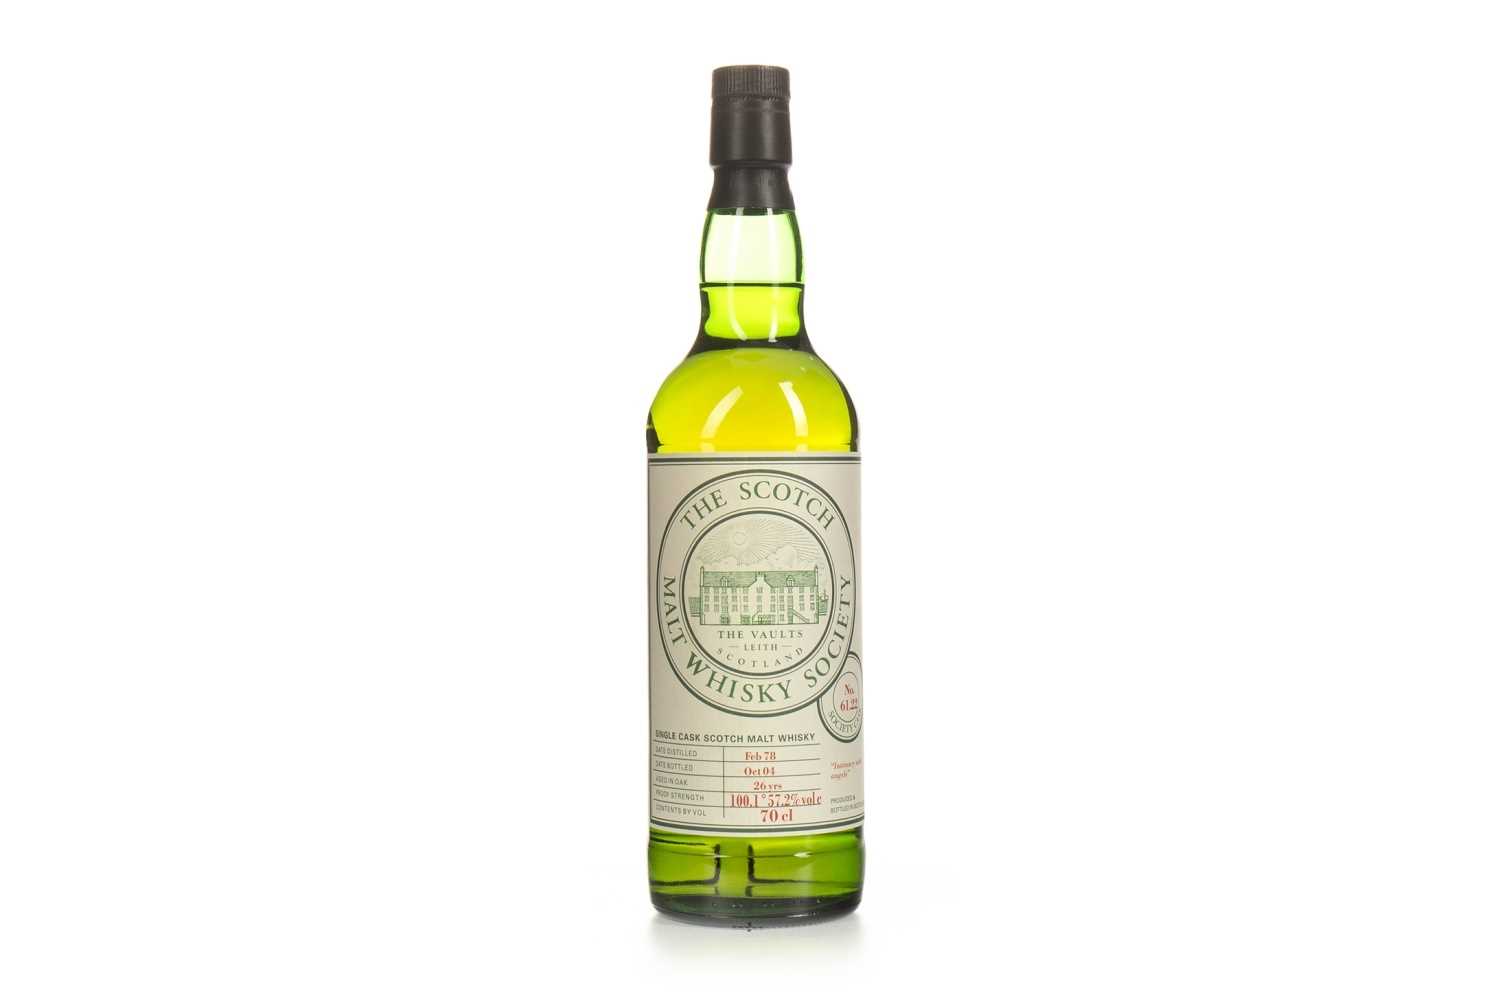 Lot 255 - BRORA 1978 SMWS 61.22 AGED 26 YEARS